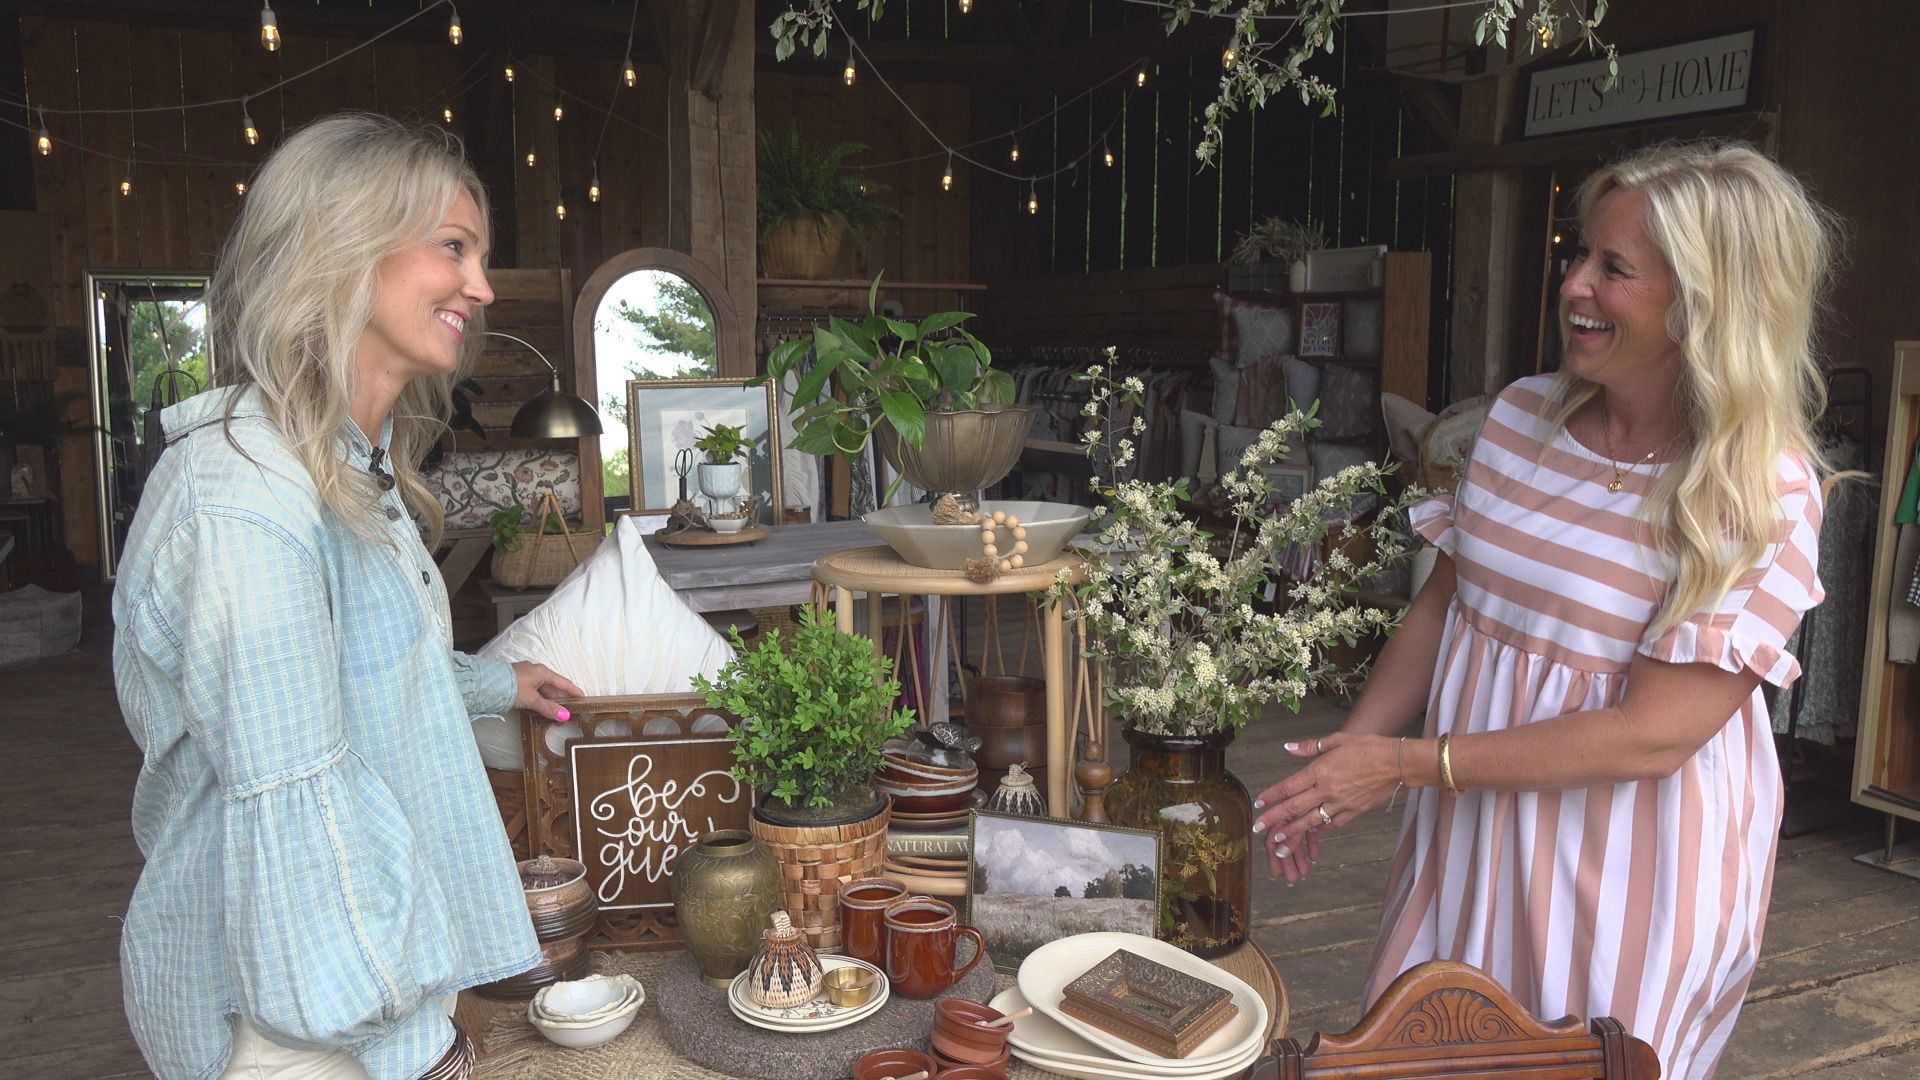 Two local moms have turned their love of thrifting into a business called Seek & Find Sisters in Grandville. It operates out of a barn built more than 150 years ago.